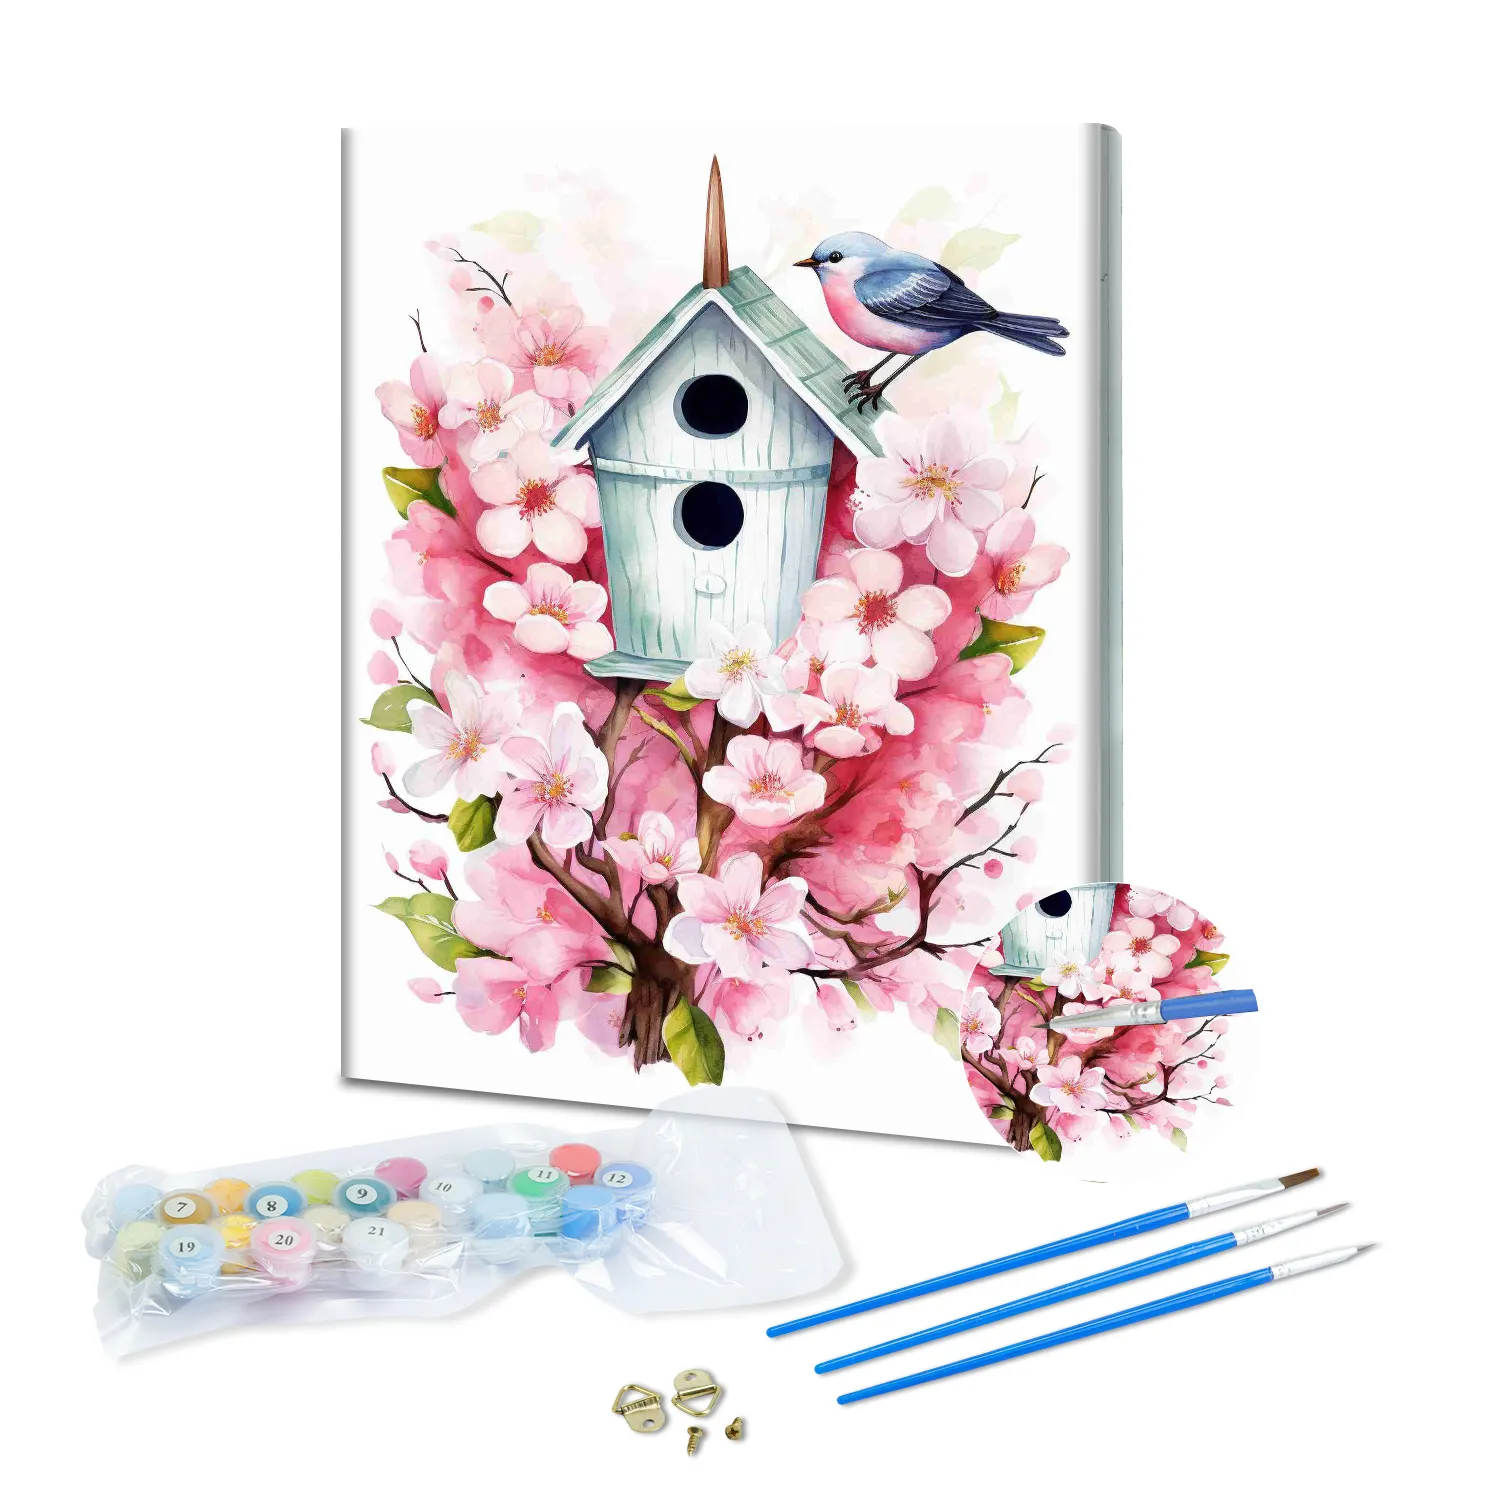 Diy The Bird's Flower House Picture Paint By Number Kits For Kids And Adults Digital Canvas Art Custom Oil Painting By Numbers